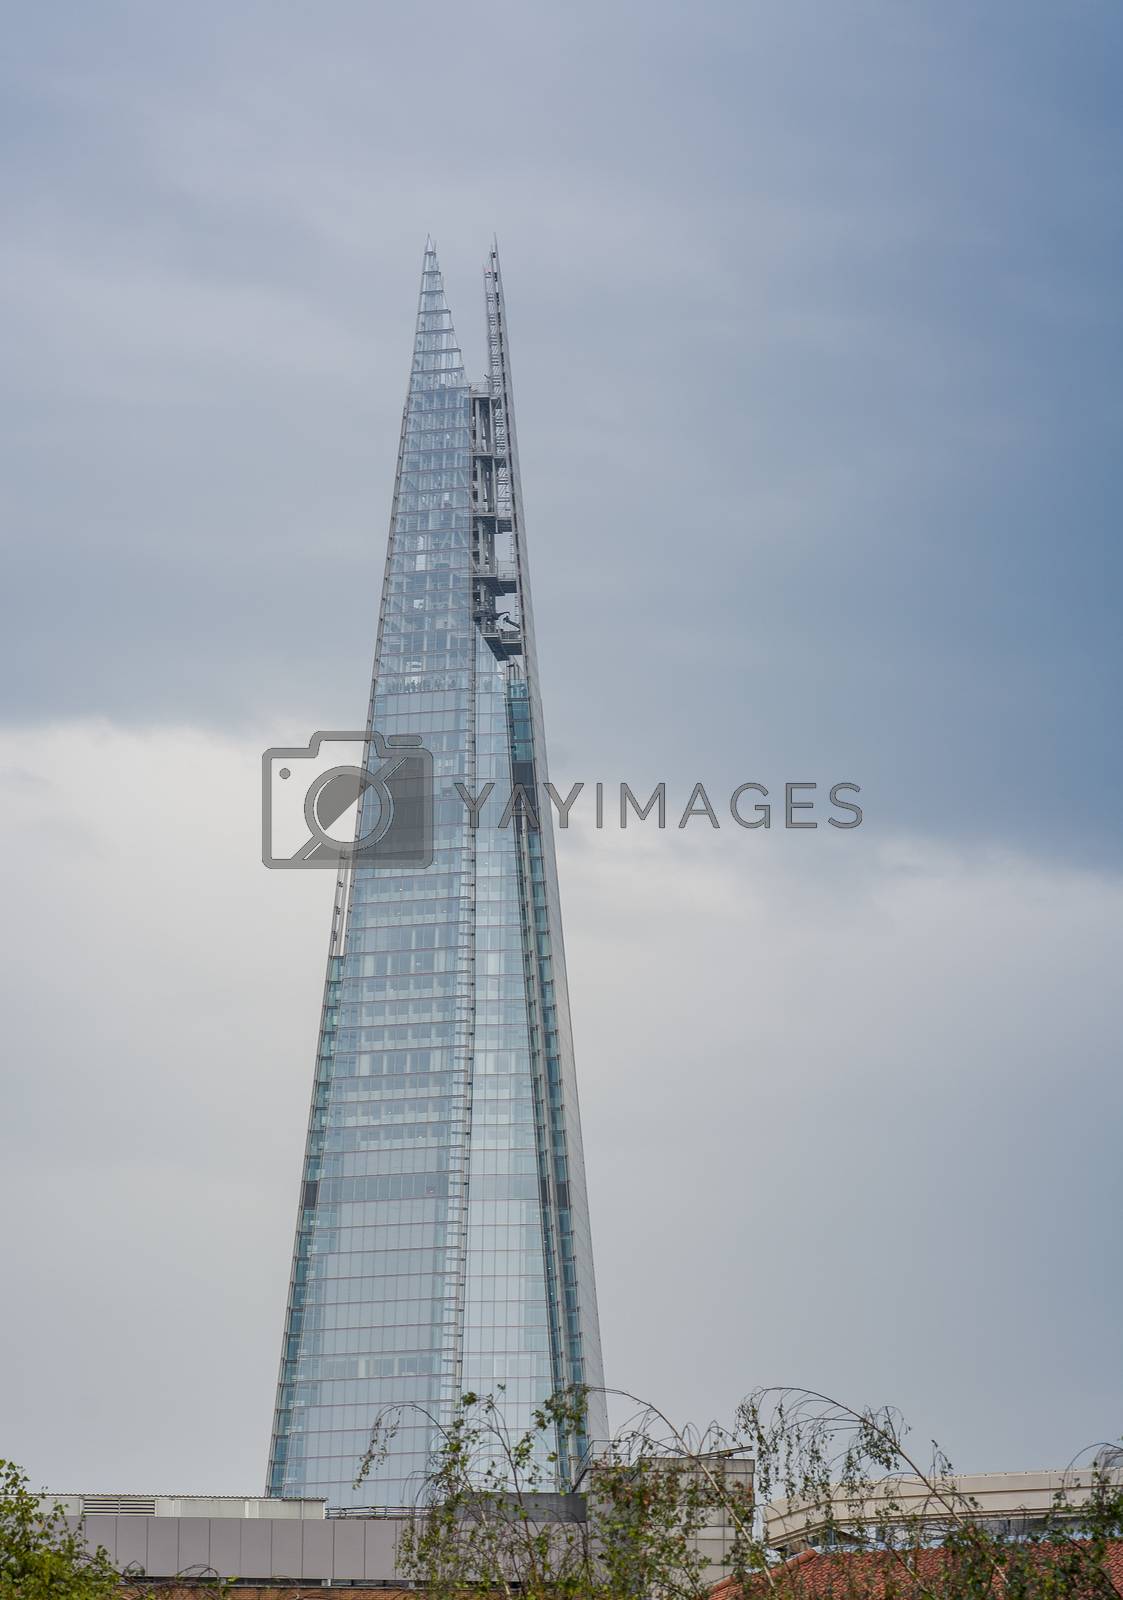 Royalty free image of LONDON - SEPTEMBER 1 - The Shard skyscraper designed by Italian by jovannig